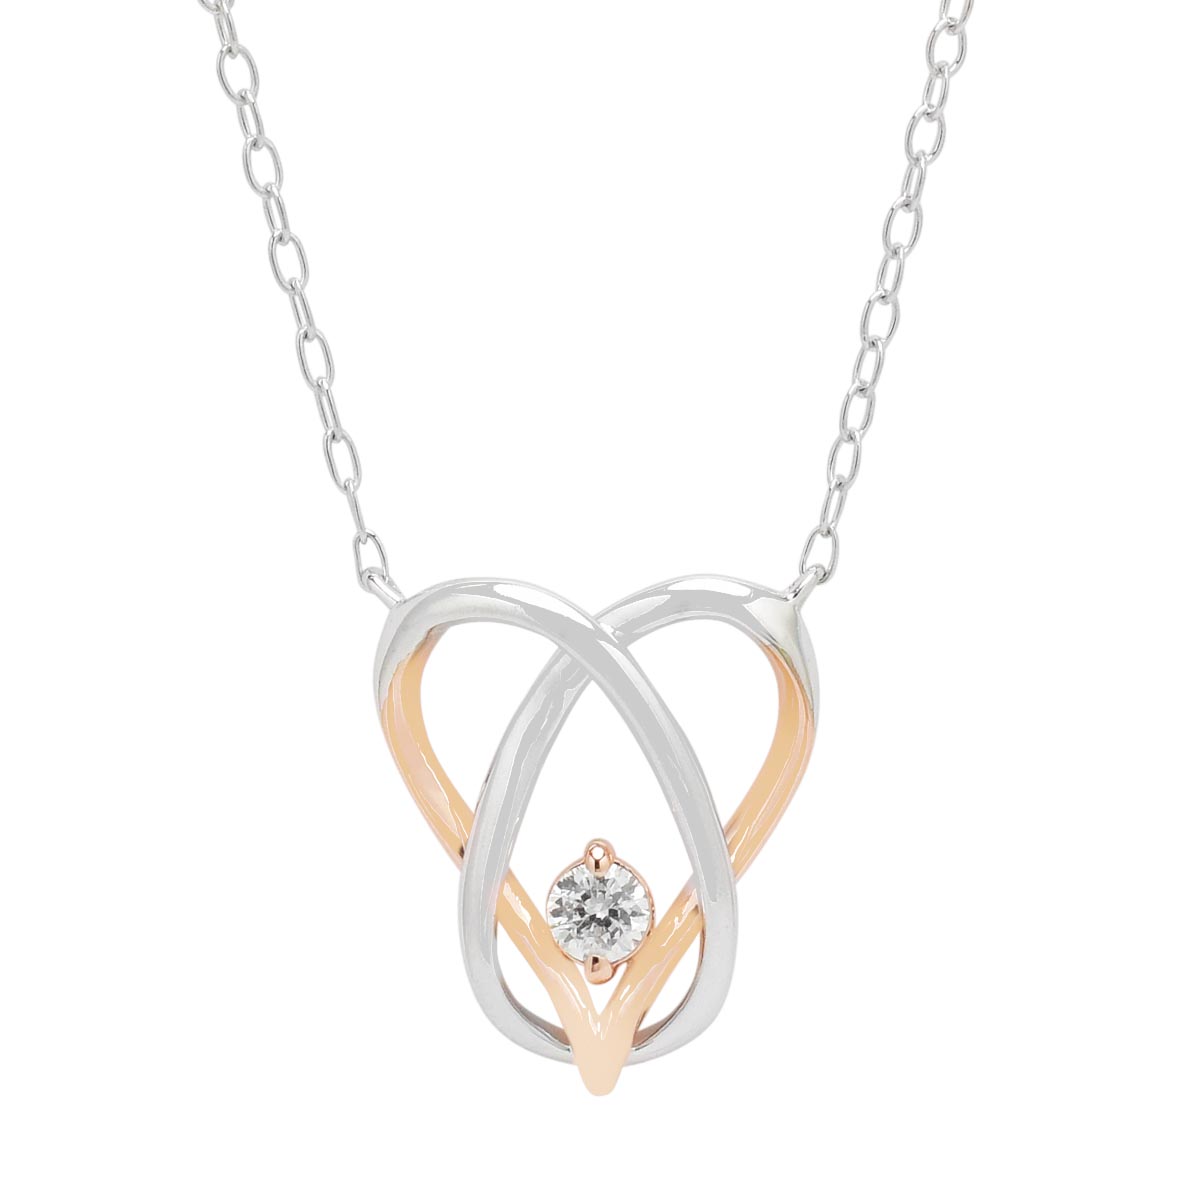 Northern Star Diamond Love Knot Collection Necklace in Sterling Silver and 10kt Rose Gold (1/10ct)